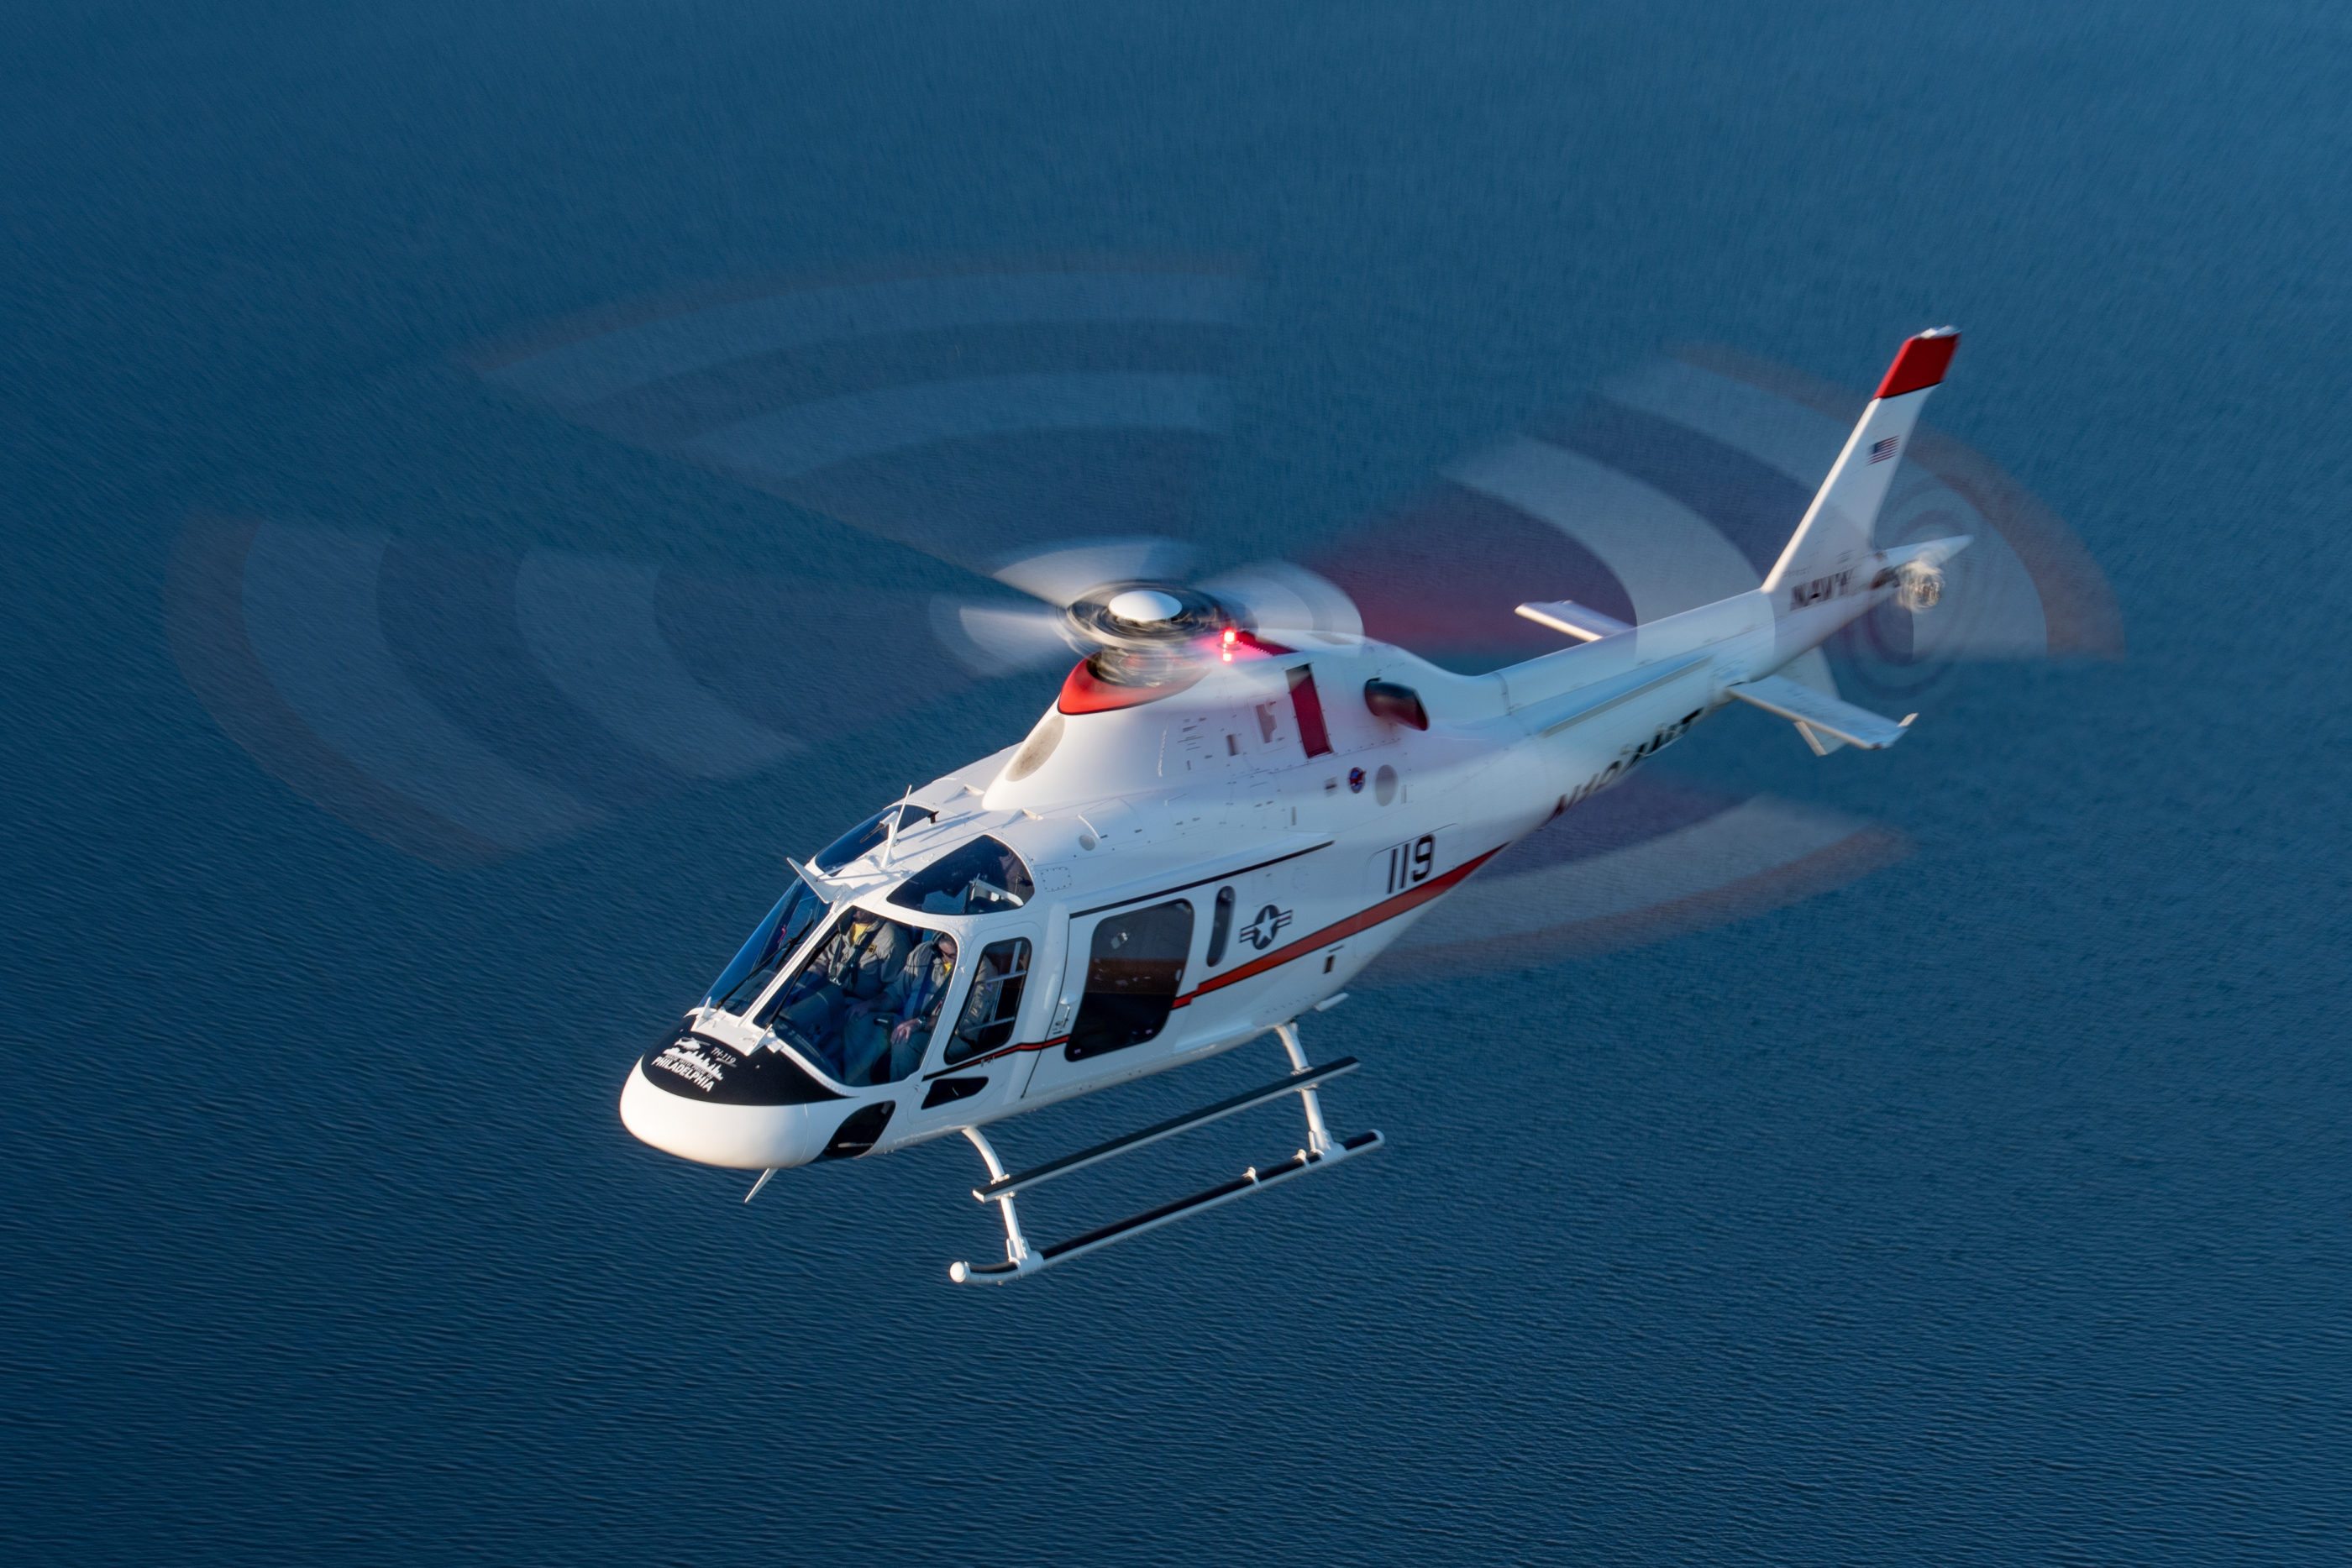 Leonardo’s TH-119 helicopter is on track to receive Federal Aviation Administration IFR certification early this year. The aircraft will be the first single engine IFR-certified helicopter in decades. Ryan Mason Photo